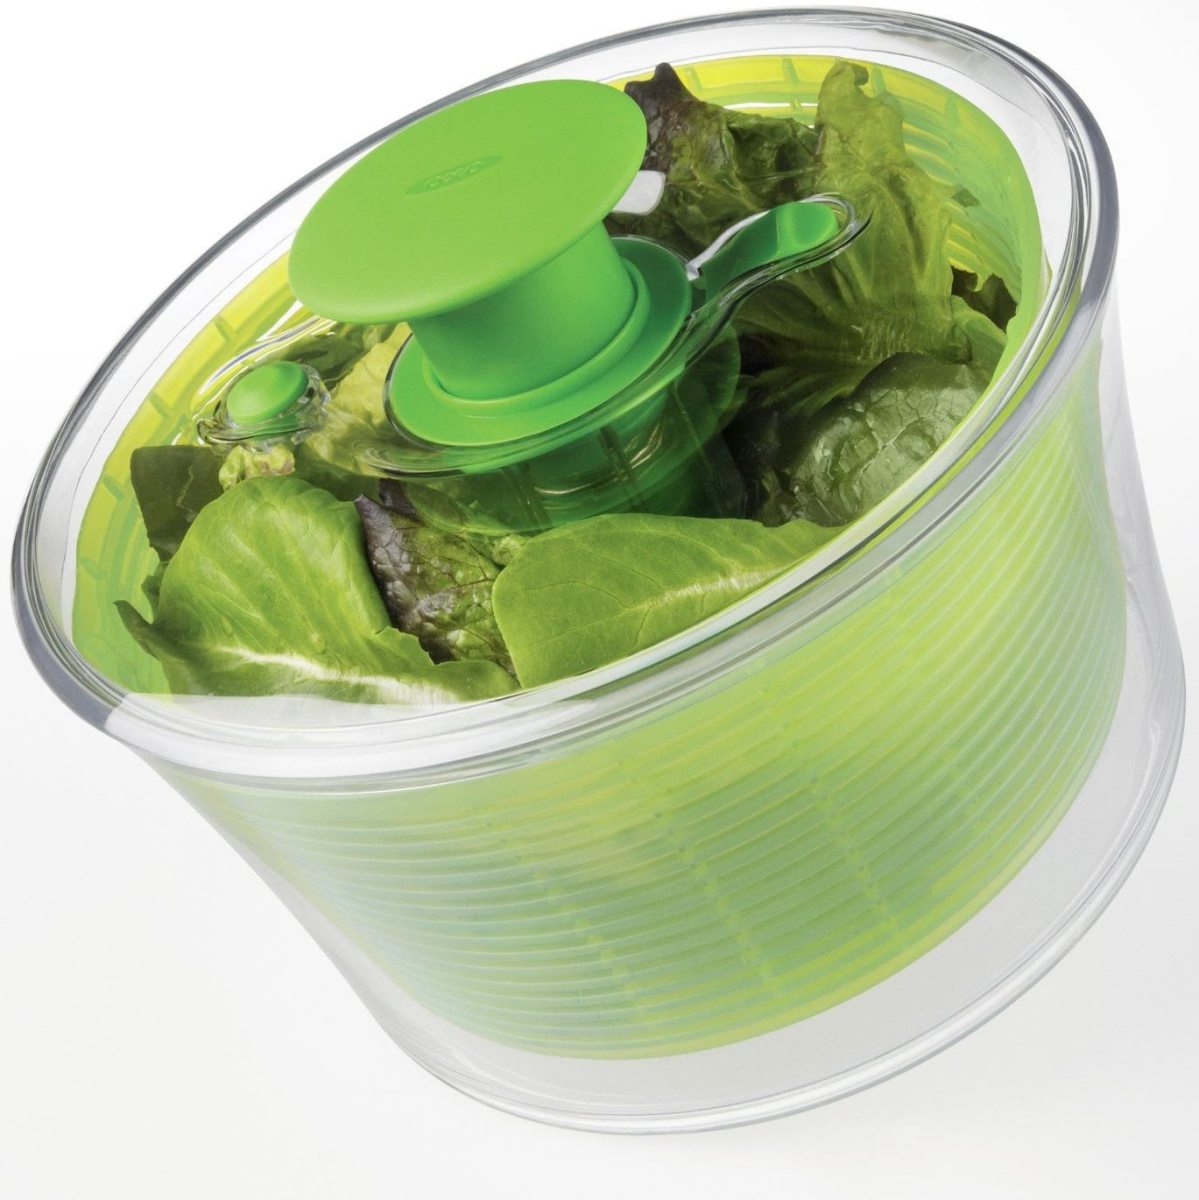 Make a lot of salads? You'll love the Oxo Salad Spinner! I do.